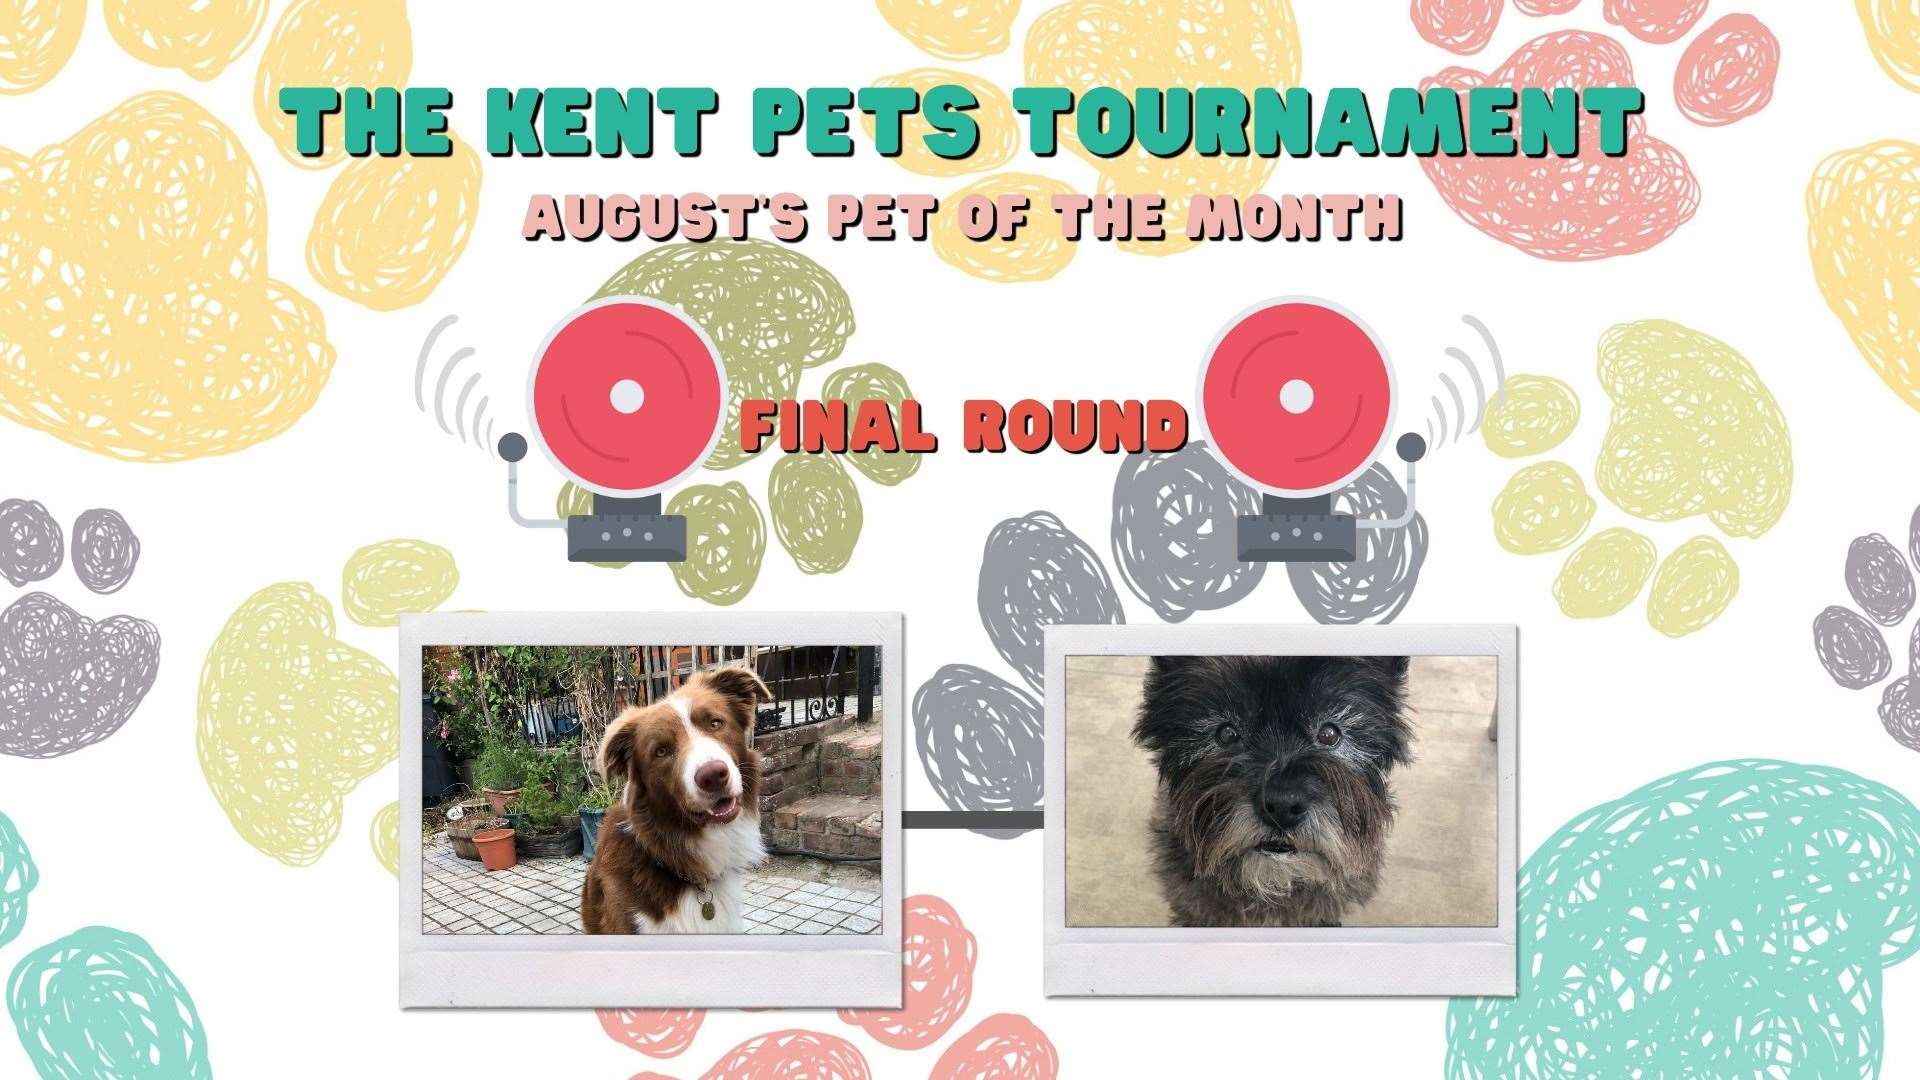 Final round of the August Kent Pets Tournament